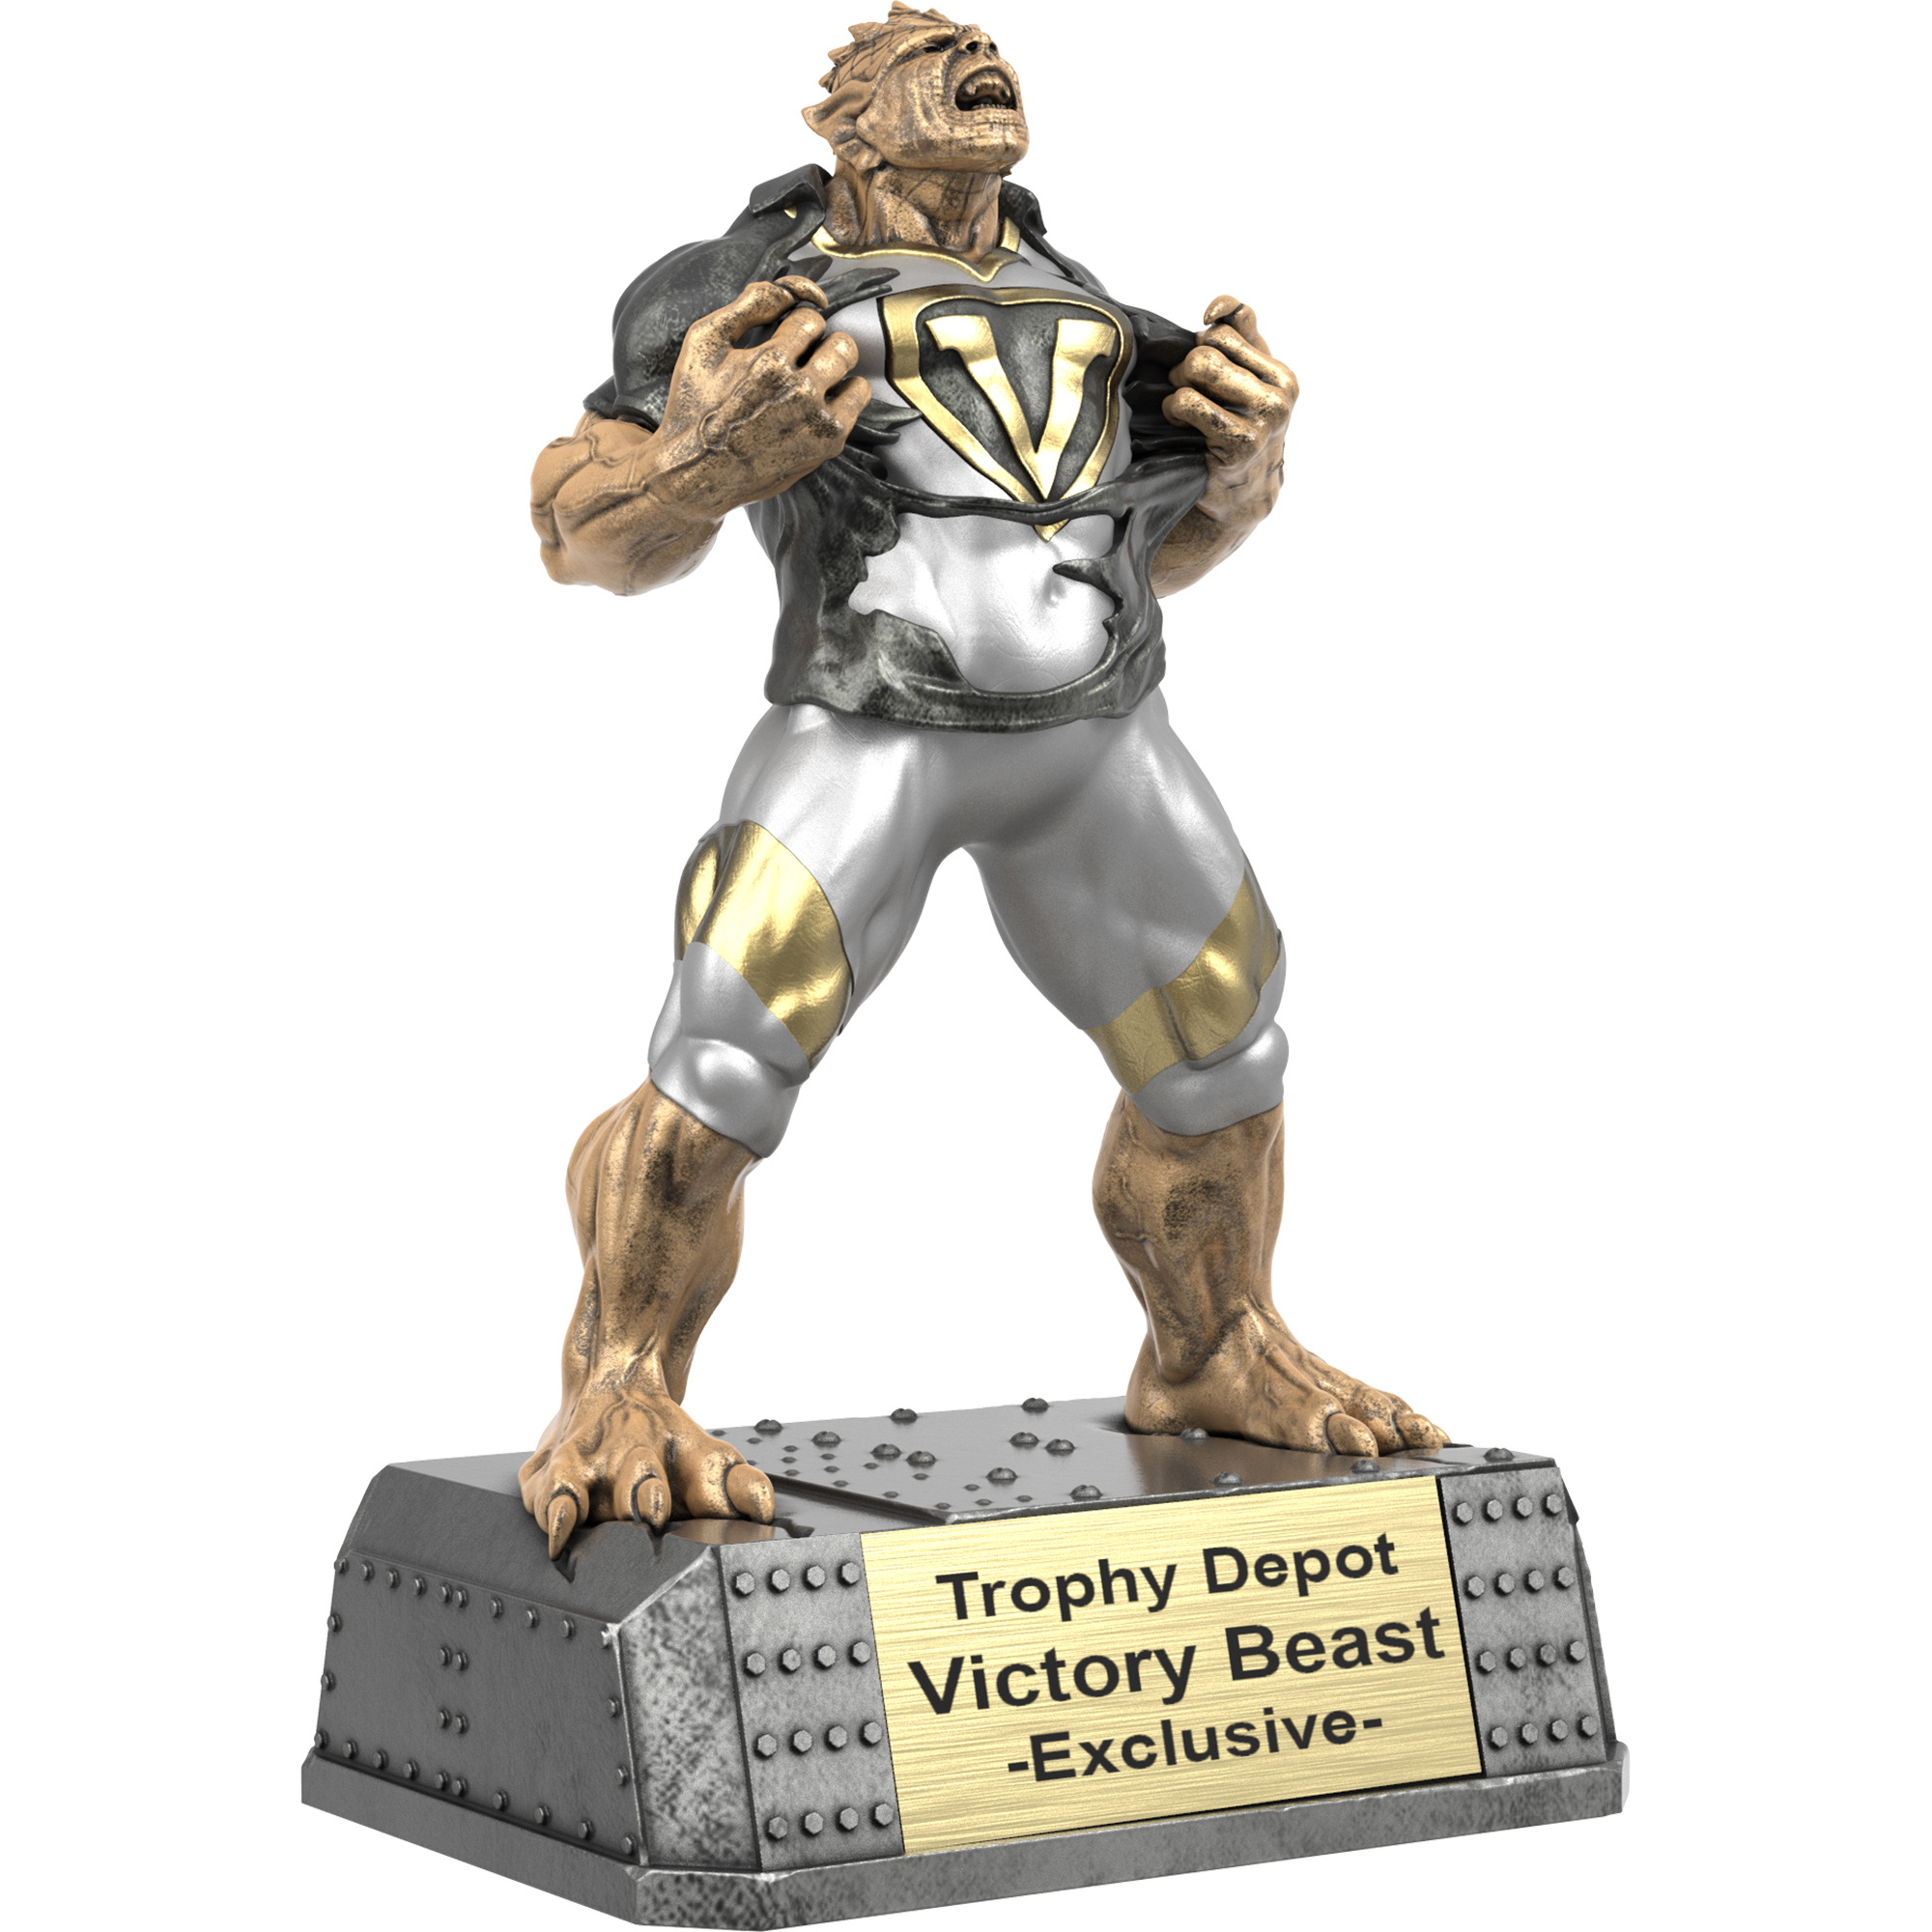 Victory Beast, Monster Sculpture Trophy - 7 inch